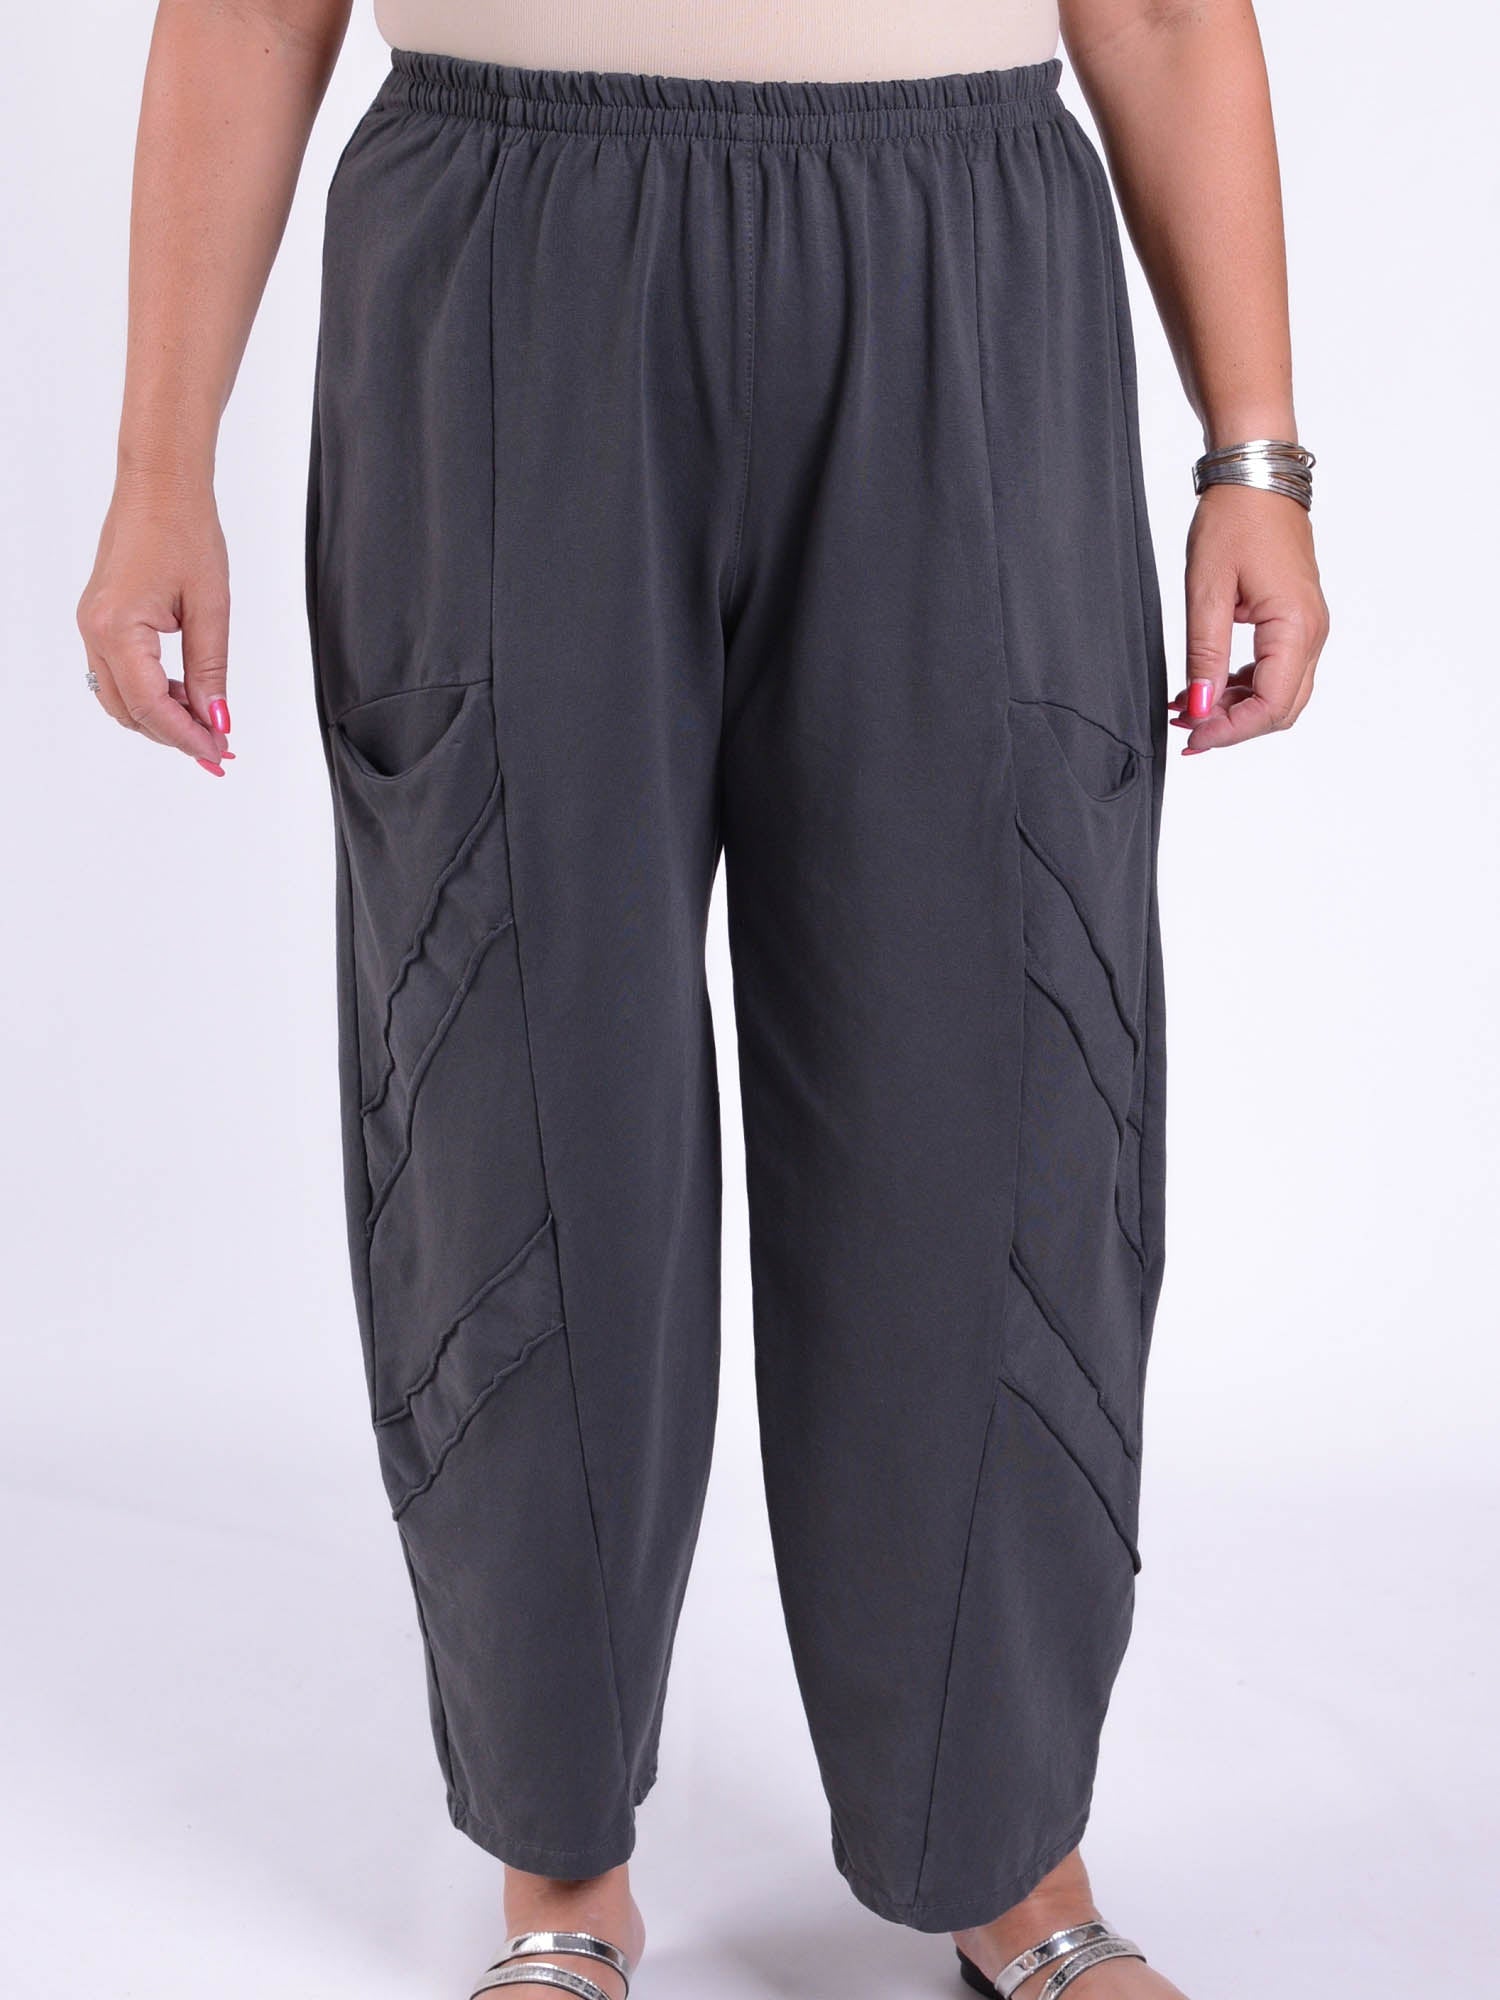 Lagenlook Heavy Cotton Trousers - 11273, Trousers, Pure Plus Clothing, Lagenlook Clothing, Plus Size Fashion, Over 50 Fashion